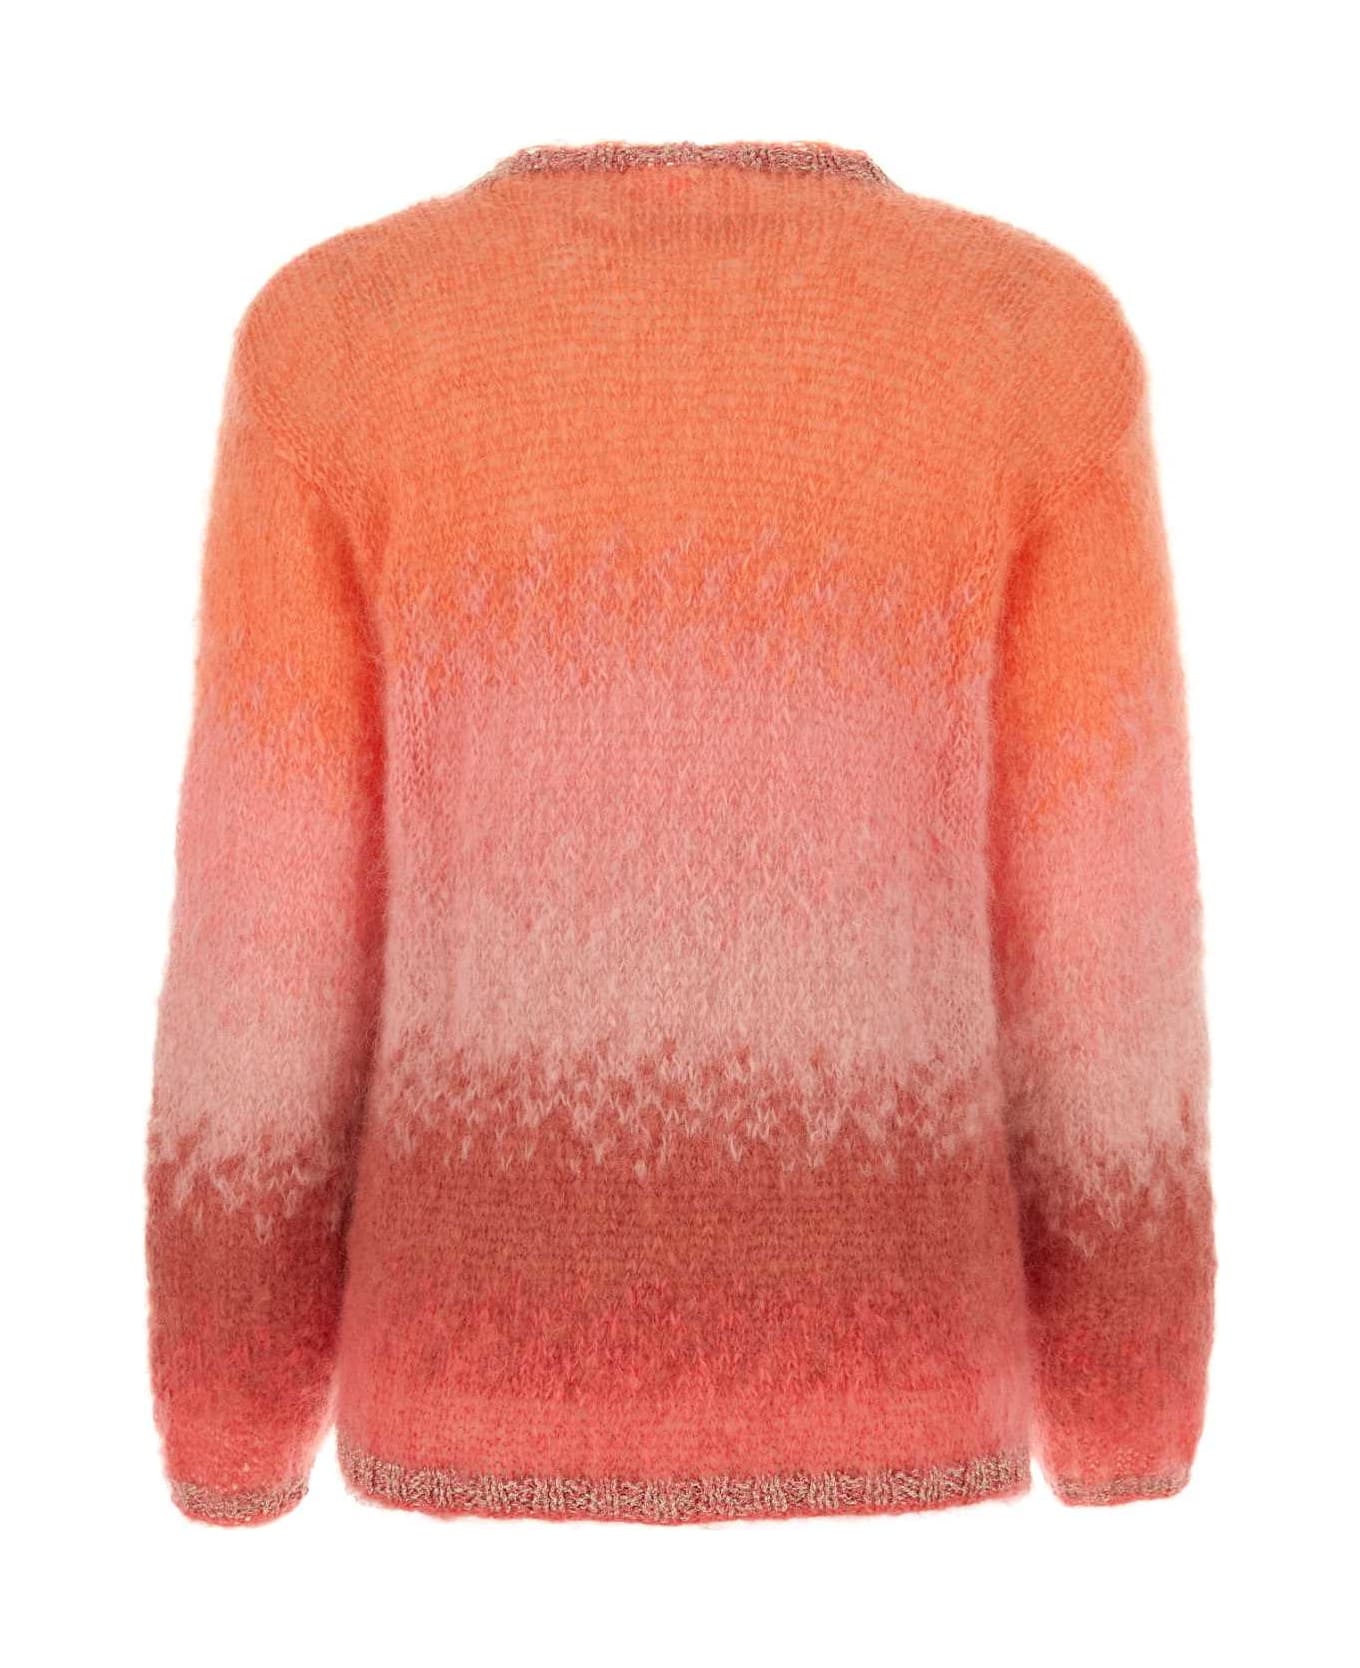 Rose Carmine Embroidered Stretch Mohair Blend Sweater - BLUSH